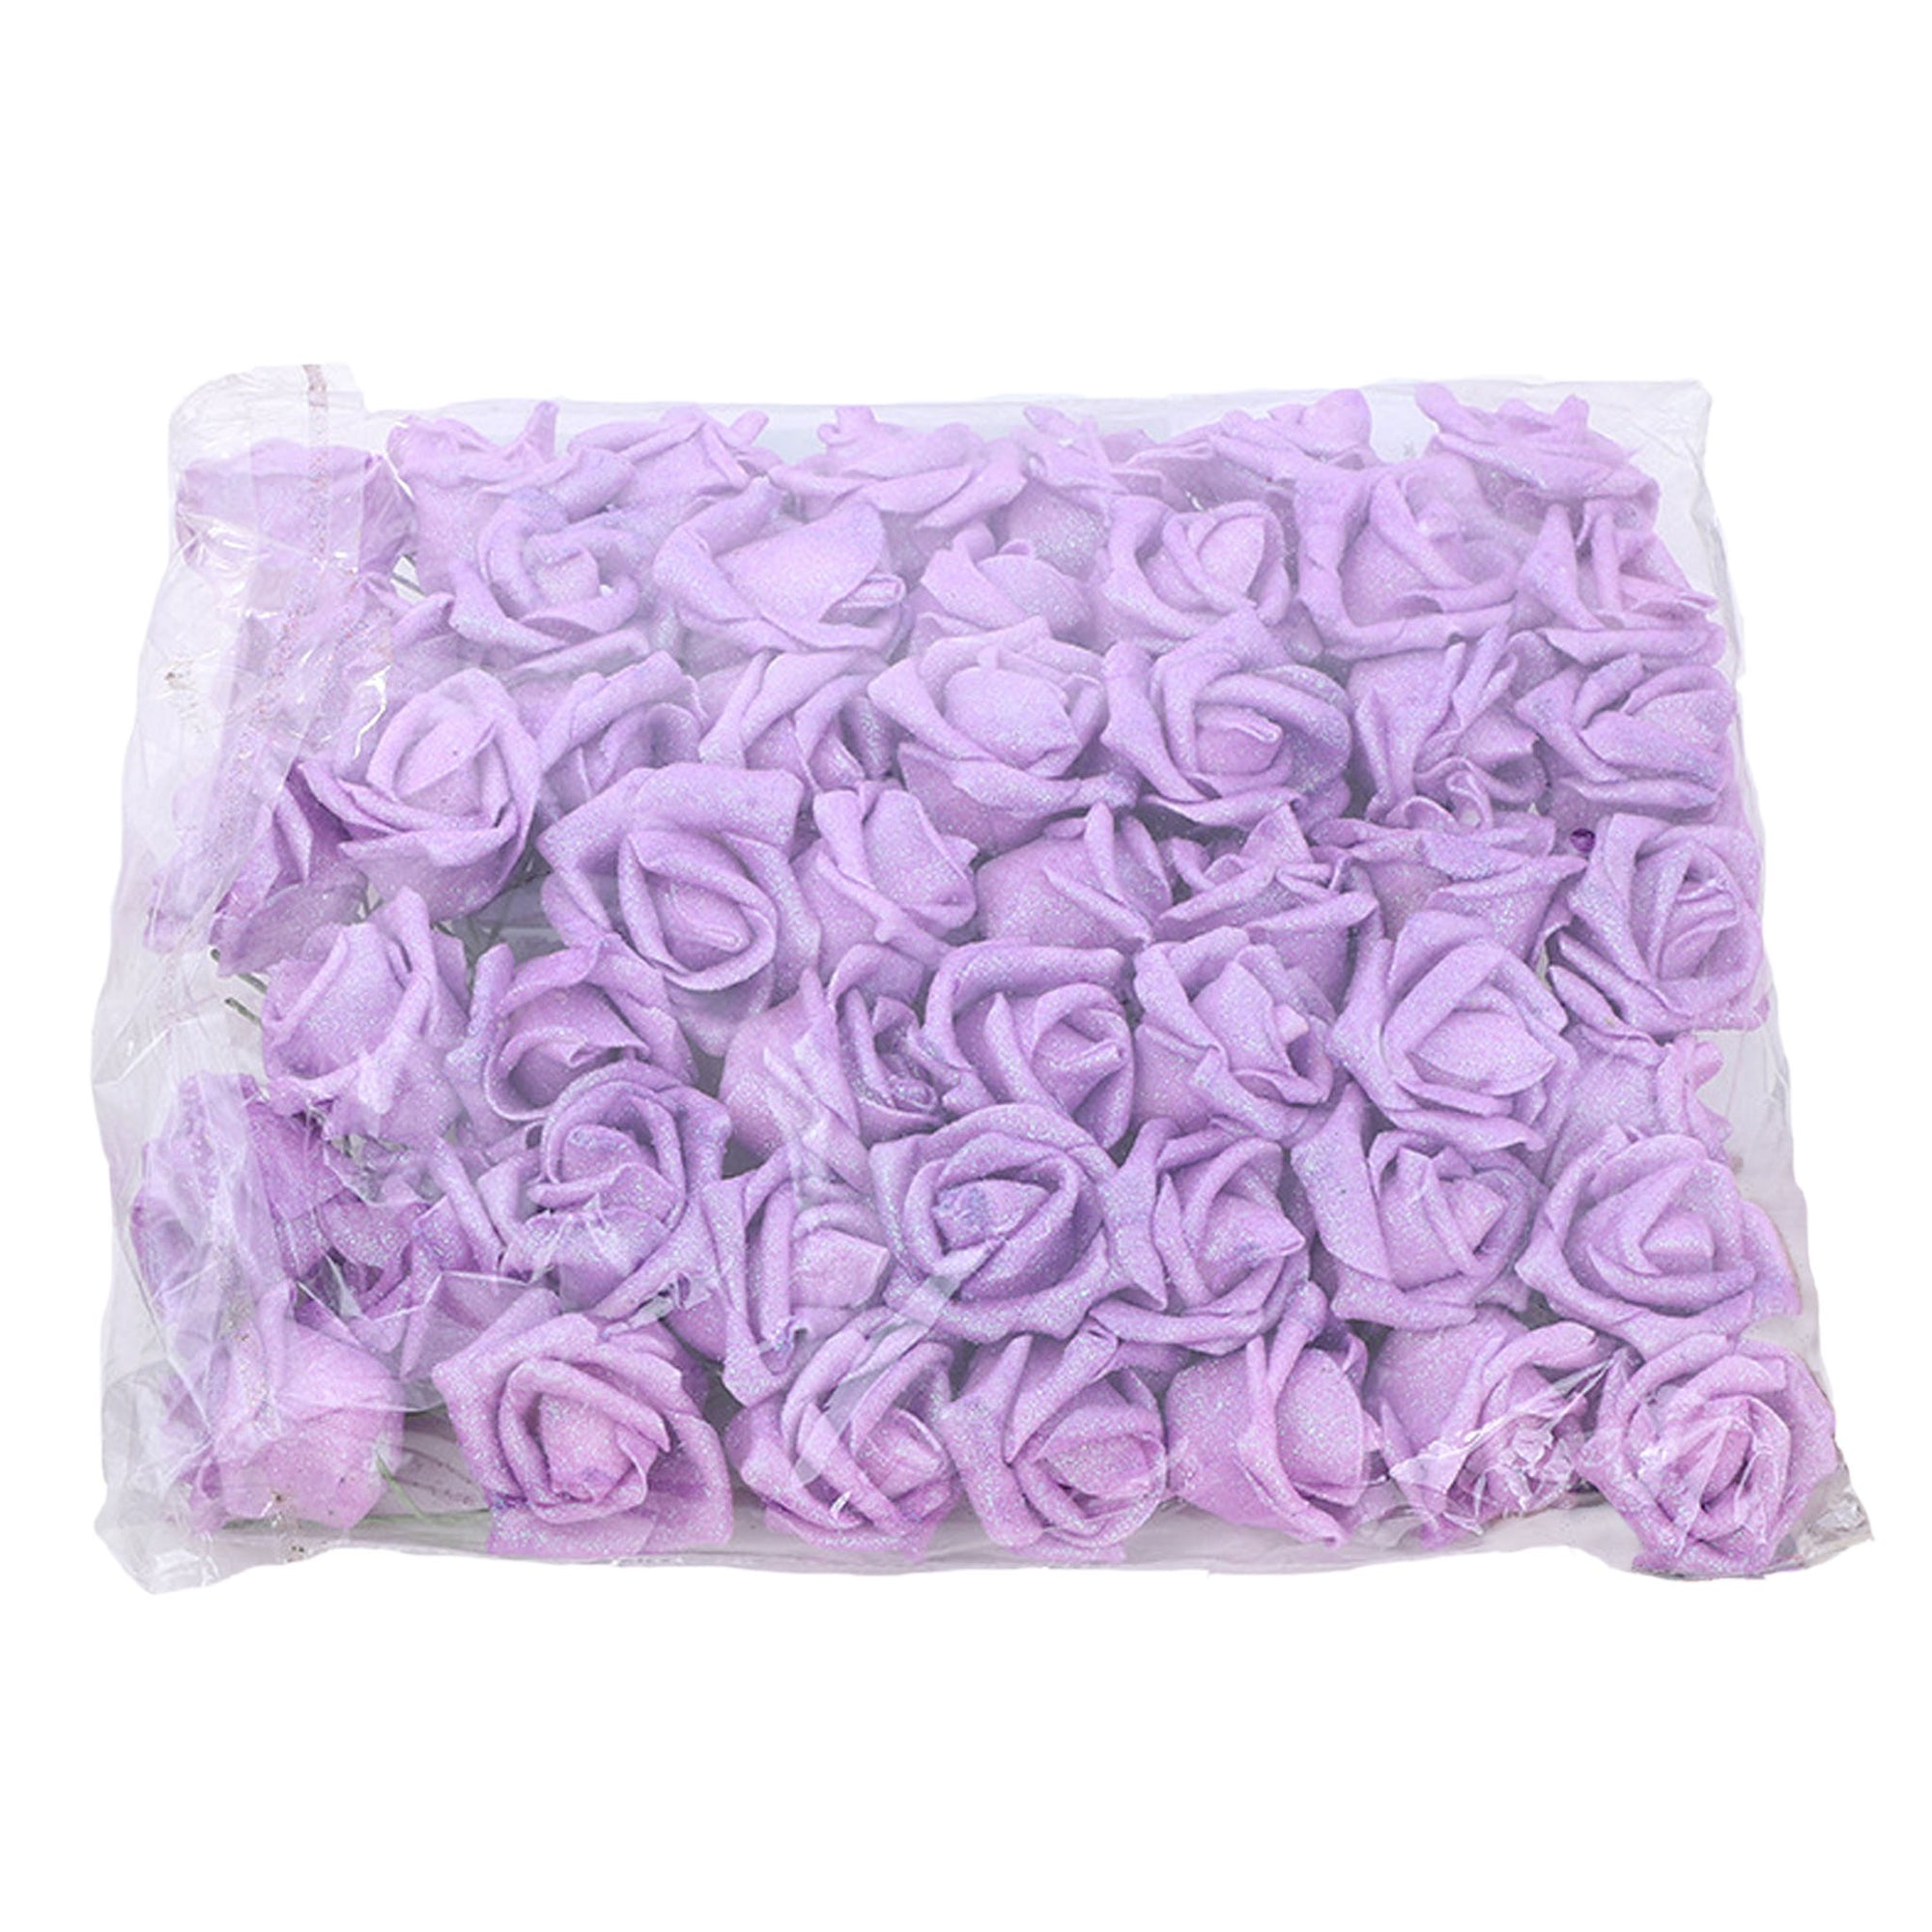 Glitter Flowers Fake Roses 50 Gold Silver Pink Purple